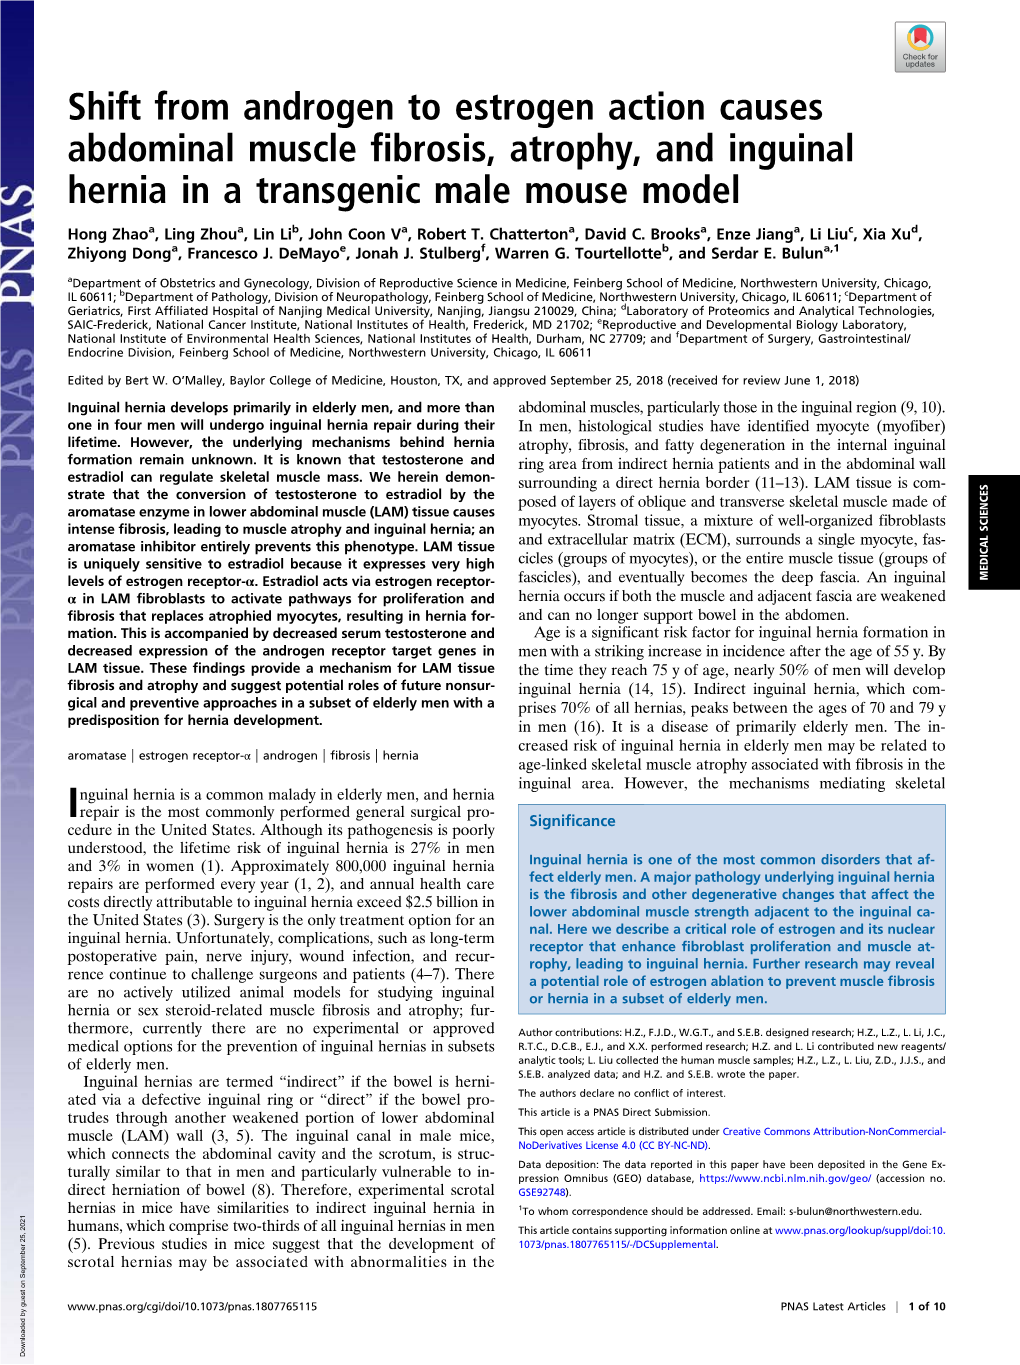 Shift from Androgen to Estrogen Action Causes Abdominal Muscle Fibrosis, Atrophy, and Inguinal Hernia in a Transgenic Male Mouse Model